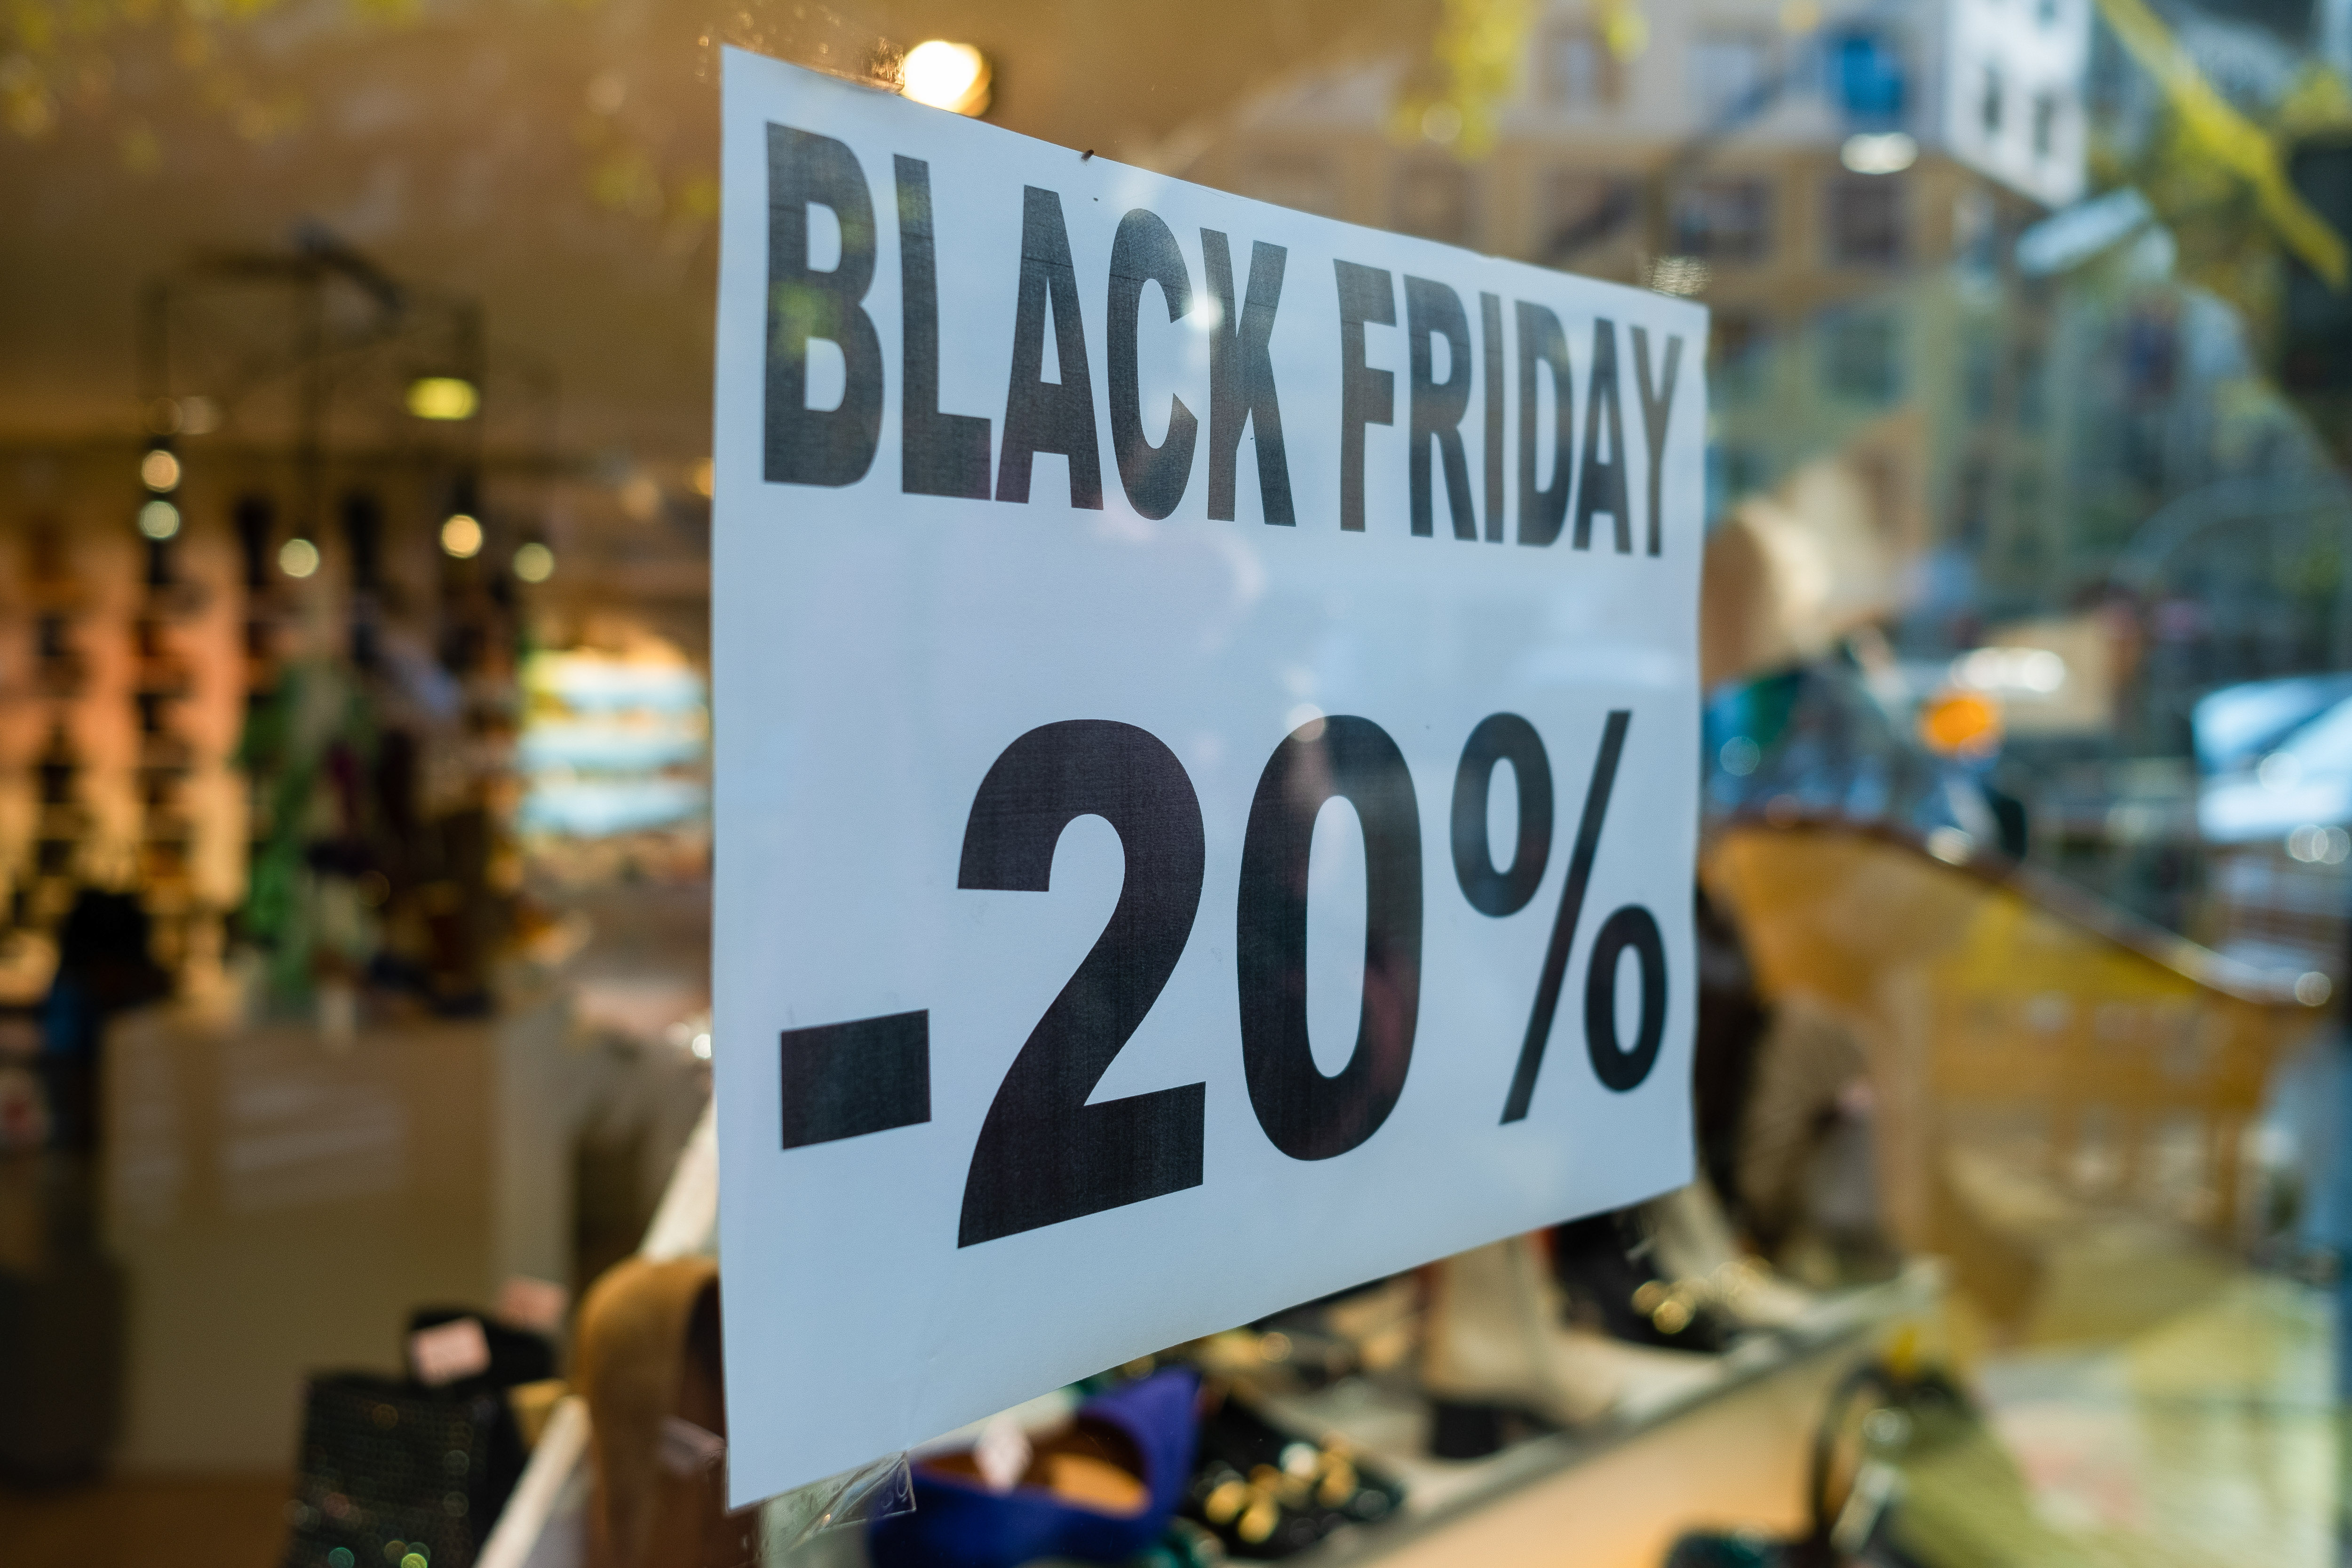 A Black Friday sign offering a 20% discount is seen in a...